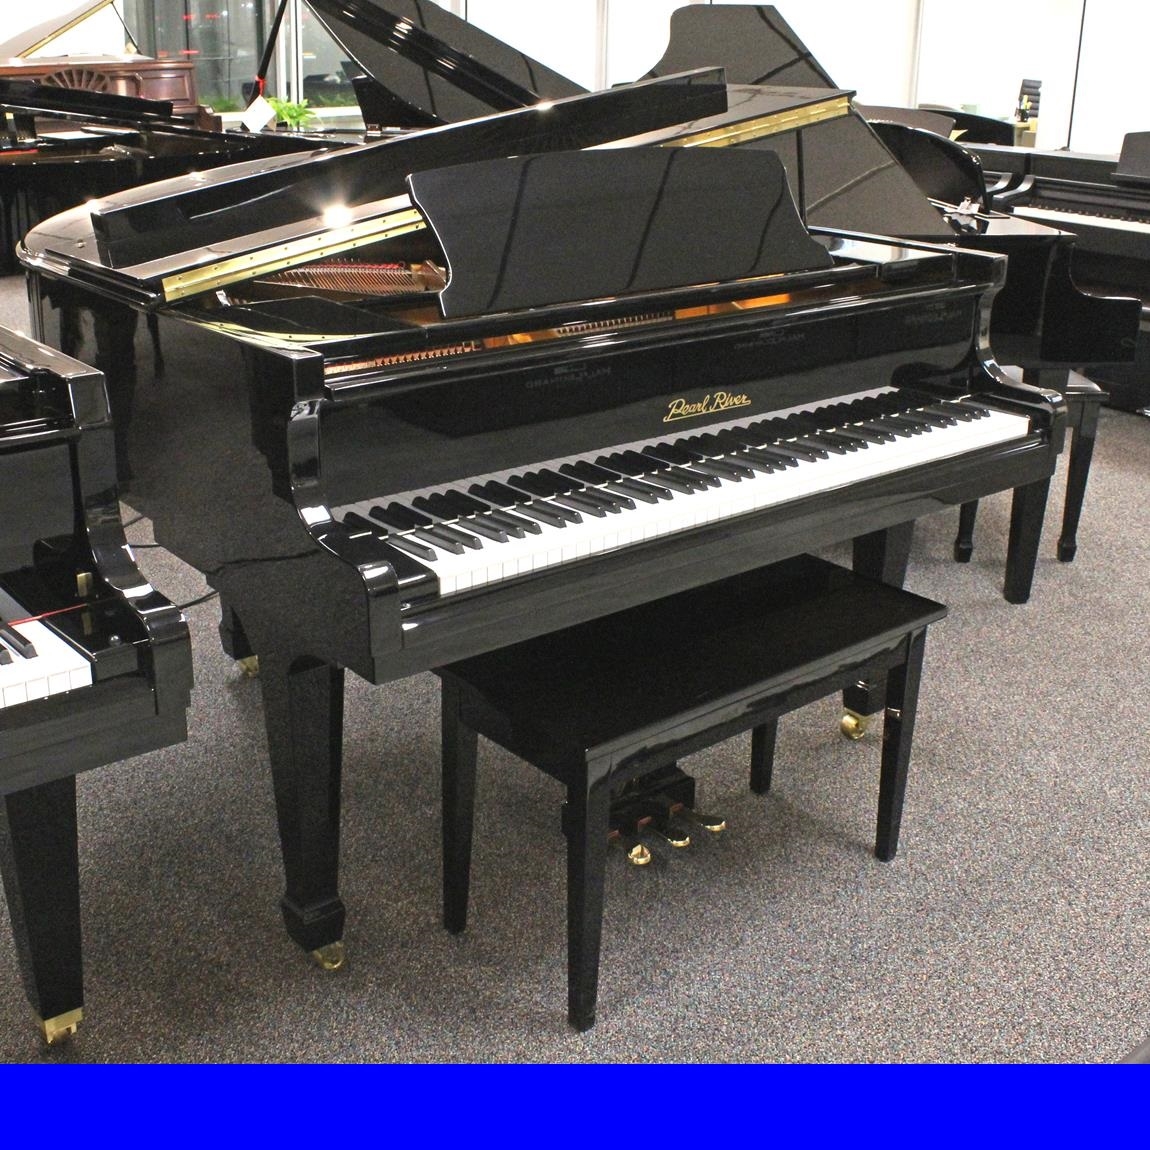 Pearl River Baby Grand Used Pianos For Sale Michigan Large Selection of PreOwned Pianos